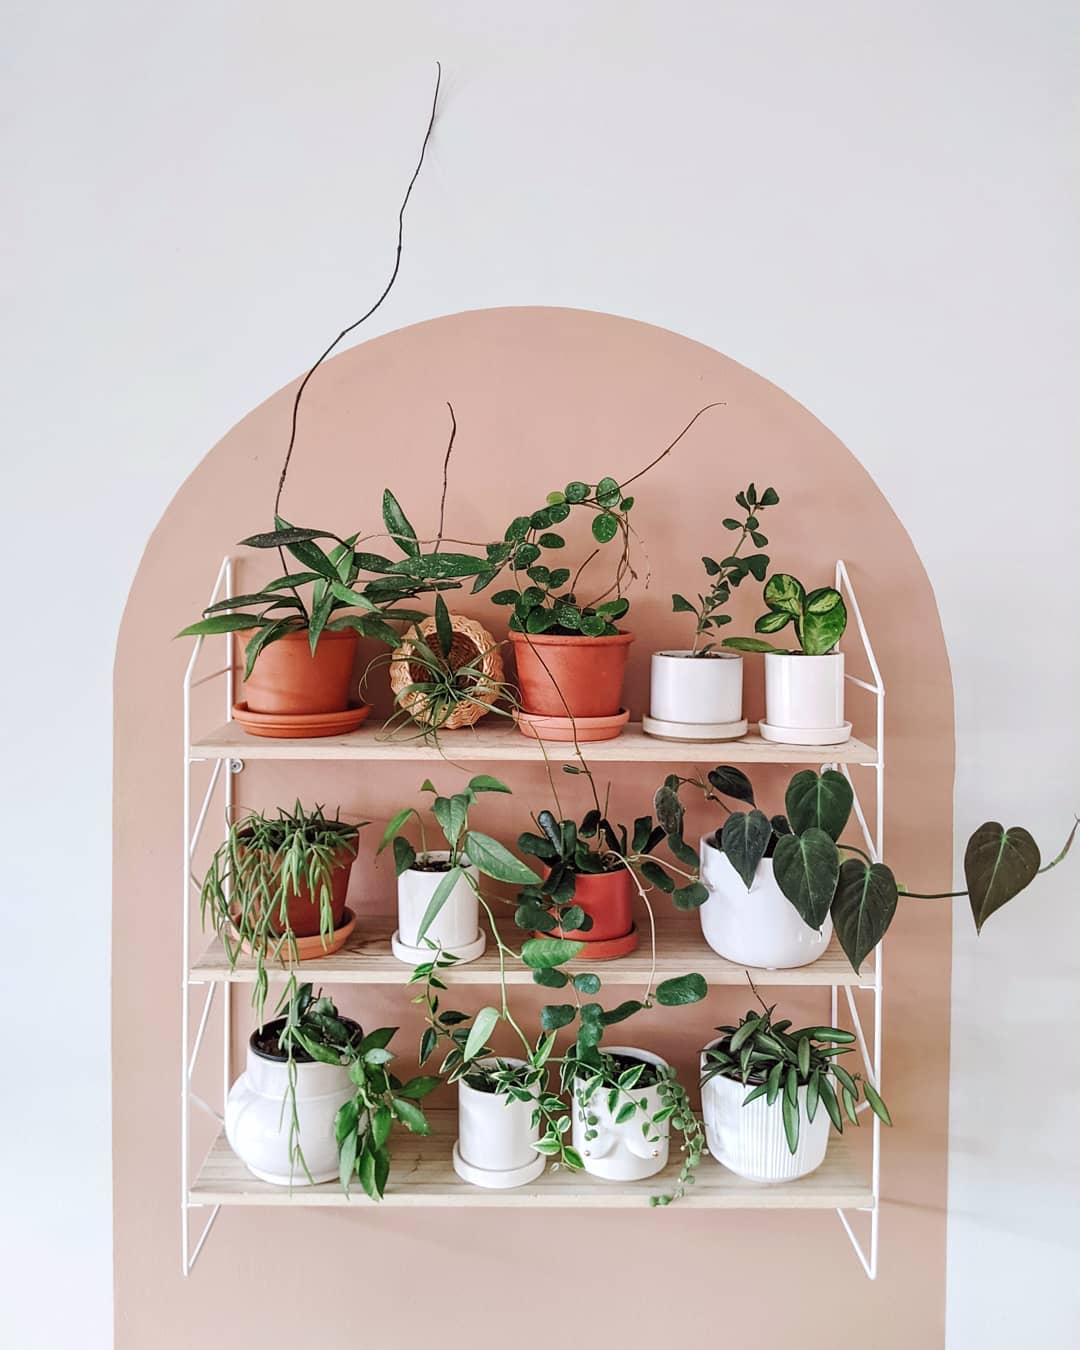 Hanging rack holding different types of plants, including crawlers and trailing plants. Photo by Instagram user @themodernmonstera.